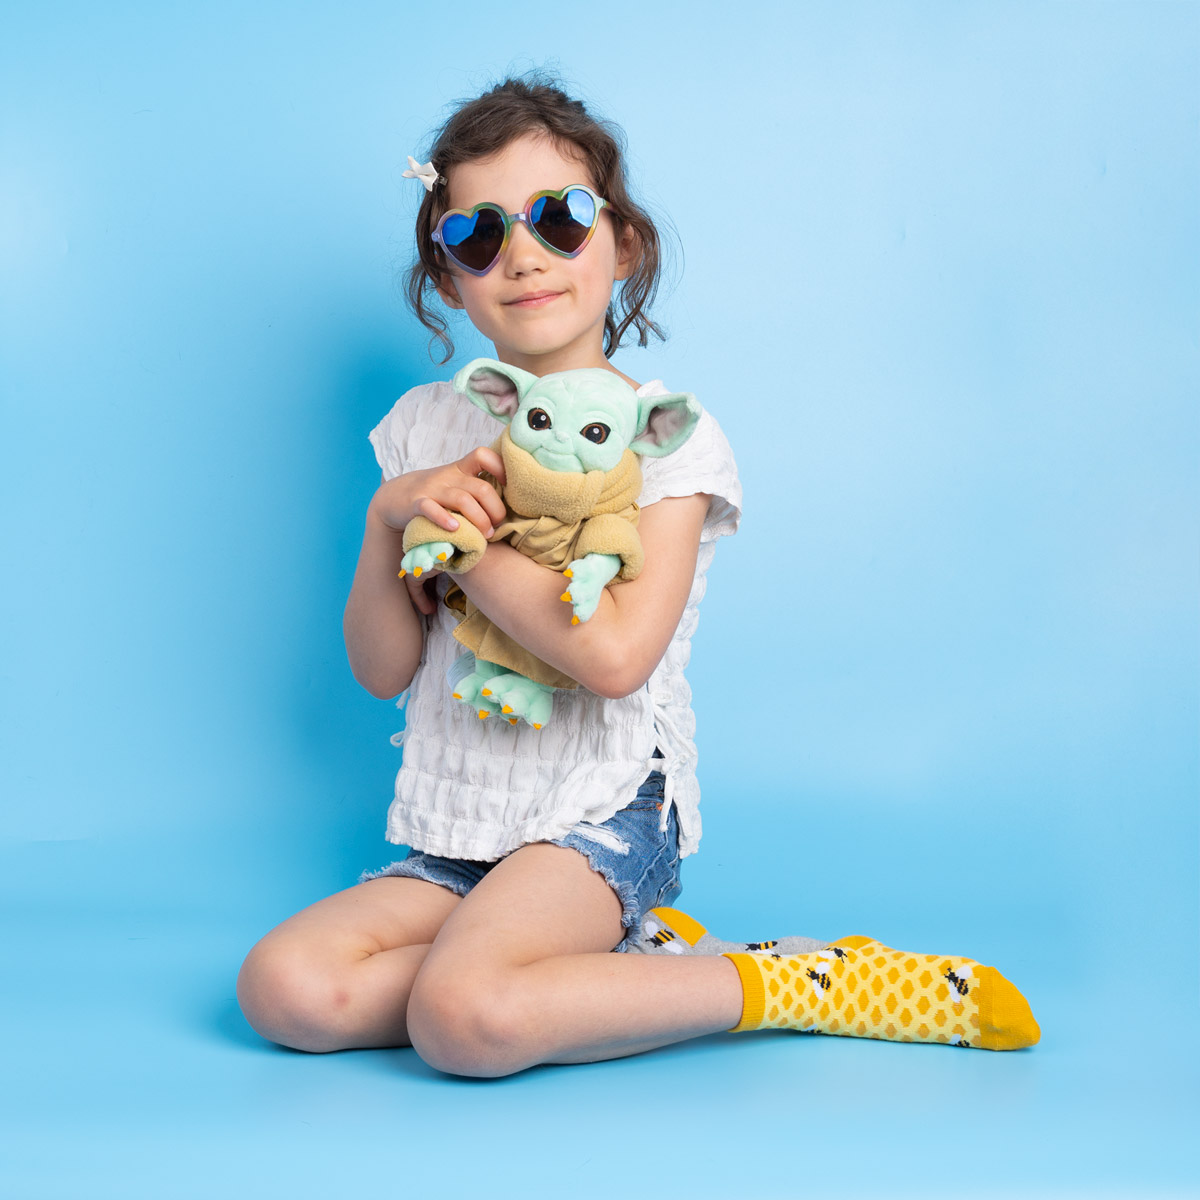 A child sitting on her knees while holding a Grogu doll and wearing blue heart shaped sunglasses.